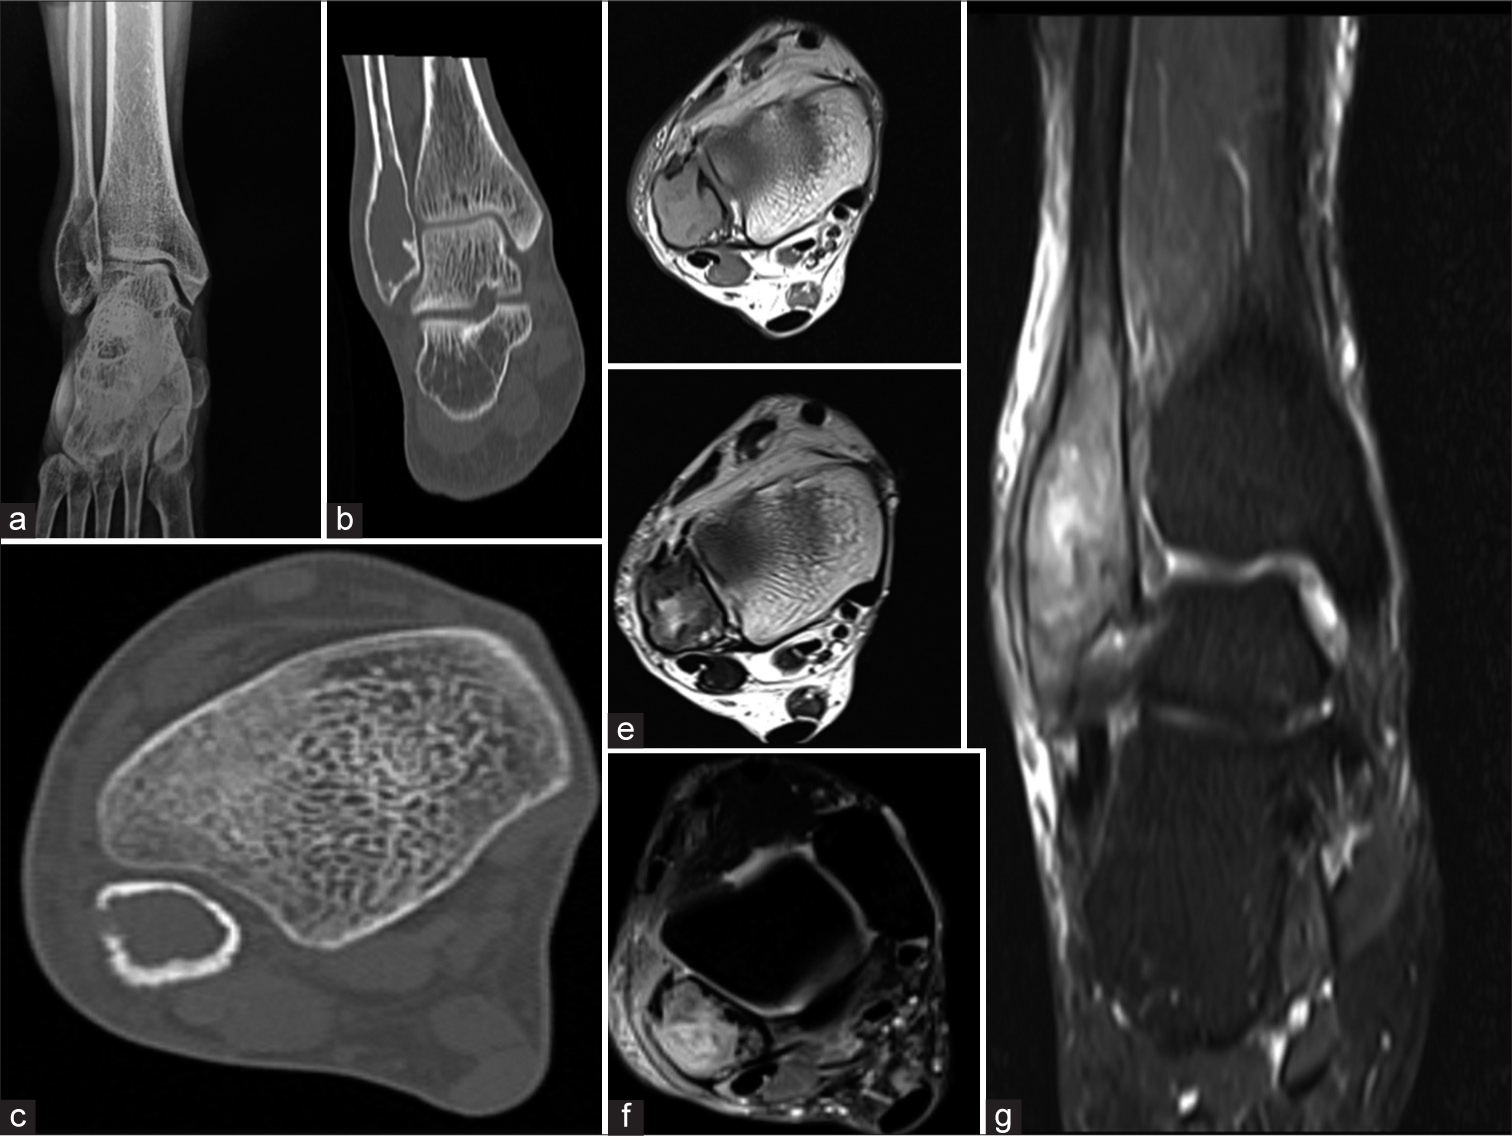 (a) Anterior-posterior radiograph, (b) Coronal computed tomography [CT] bone window, (c) Axial CT bone window. Lytic expansile lesion of the lateral malleolus with focal cortical break in the lateral aspect. No matrix calcification. No convincing periosteal reaction (d) Axial T1-weighted image, (e) Axial T2-weighted image, (f) Axial proton density fat-saturated sequence (PDFS), (g) Coronal short-tau inversion recovery [STIR]). The expansile solid lesion in the right distal fibula with some areas of focal cortical destruction extending upto the articular surface. The lesion displays an intermediate signal on T1/T2 and a hyperintense signal on STIR and PDFS. Edematous changes are seen in the perilesional soft tissues.